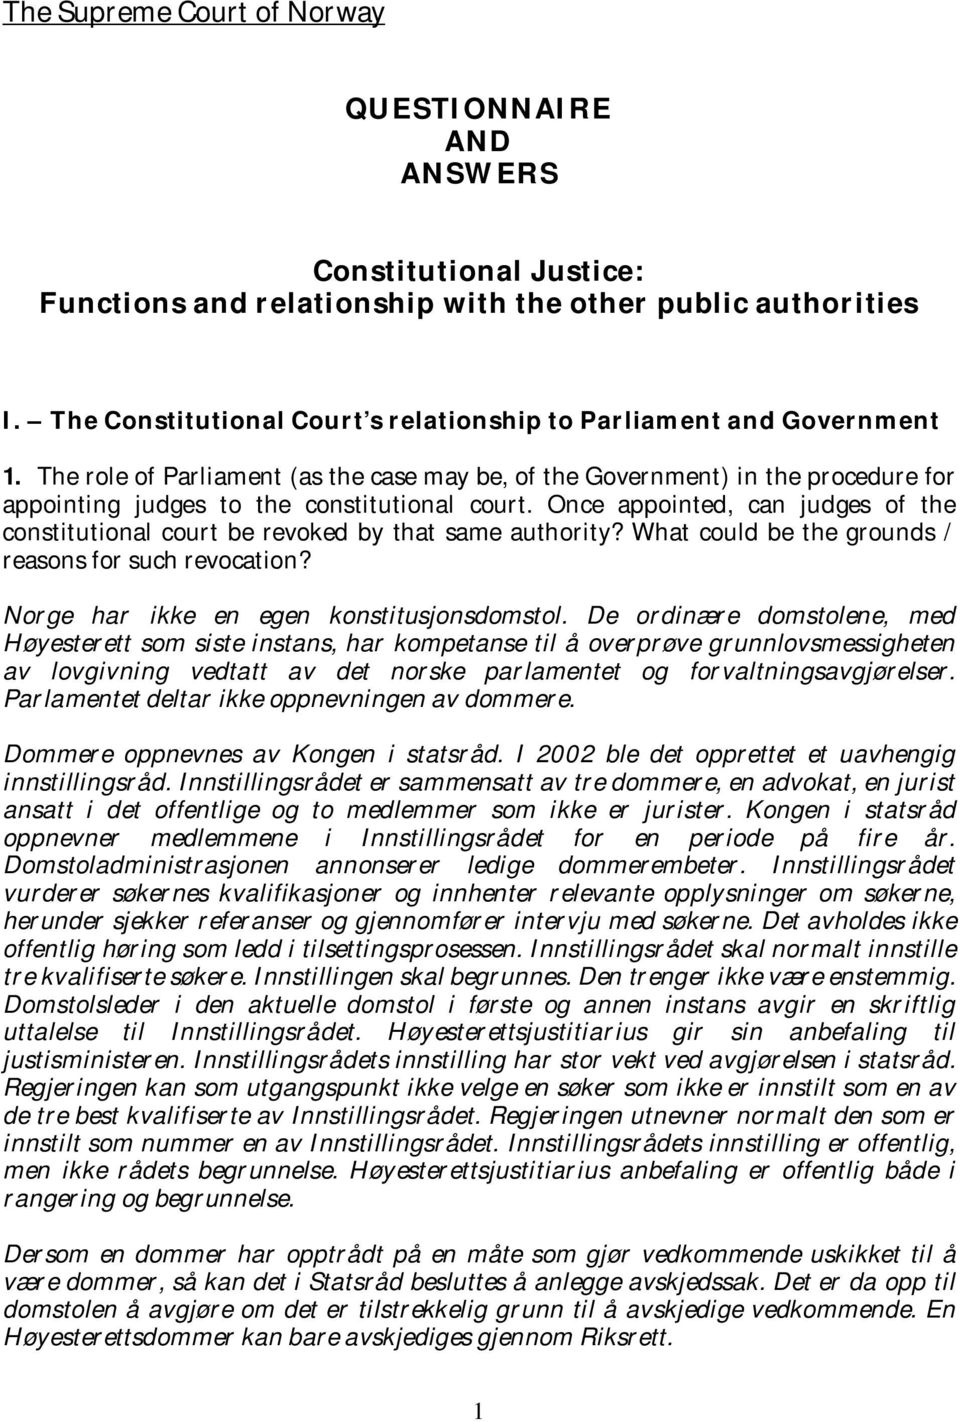 The role of Parliament (as the case may be, of the Government) in the procedure for appointing judges to the constitutional court.